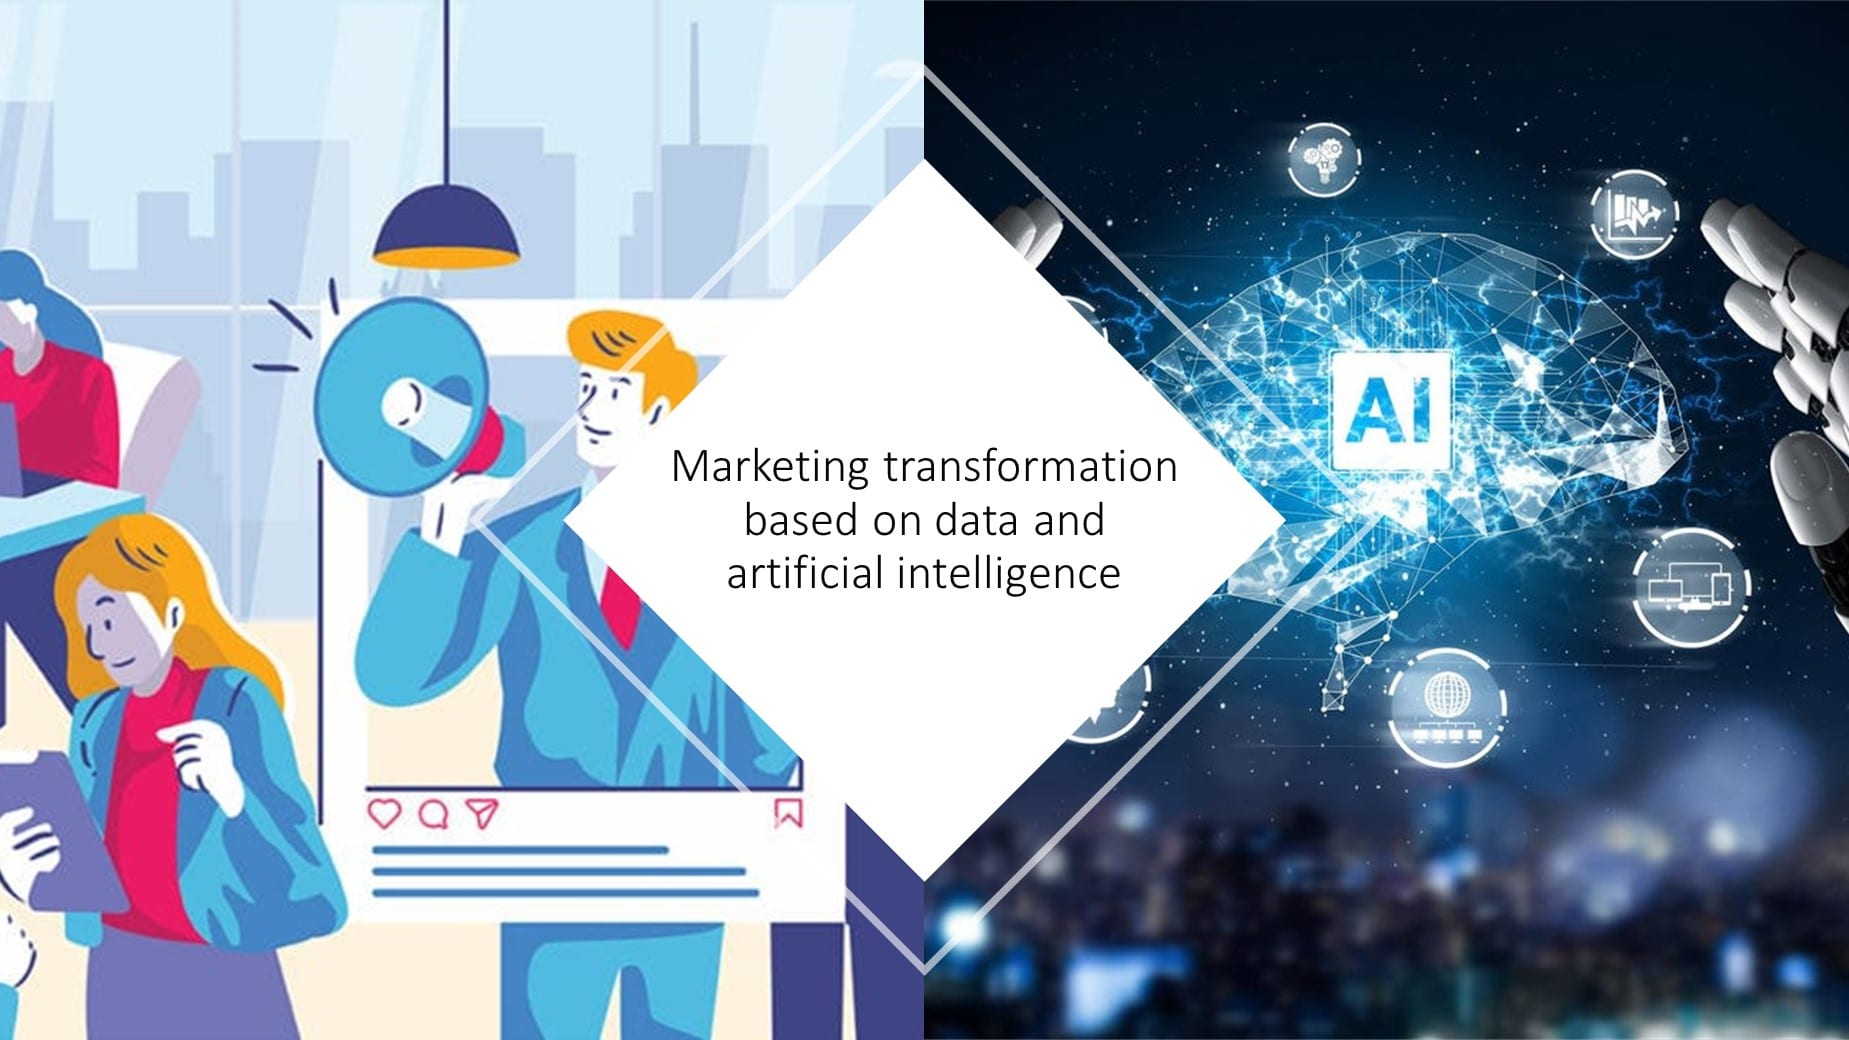 Marketing transformation based on data and artificial intelligence